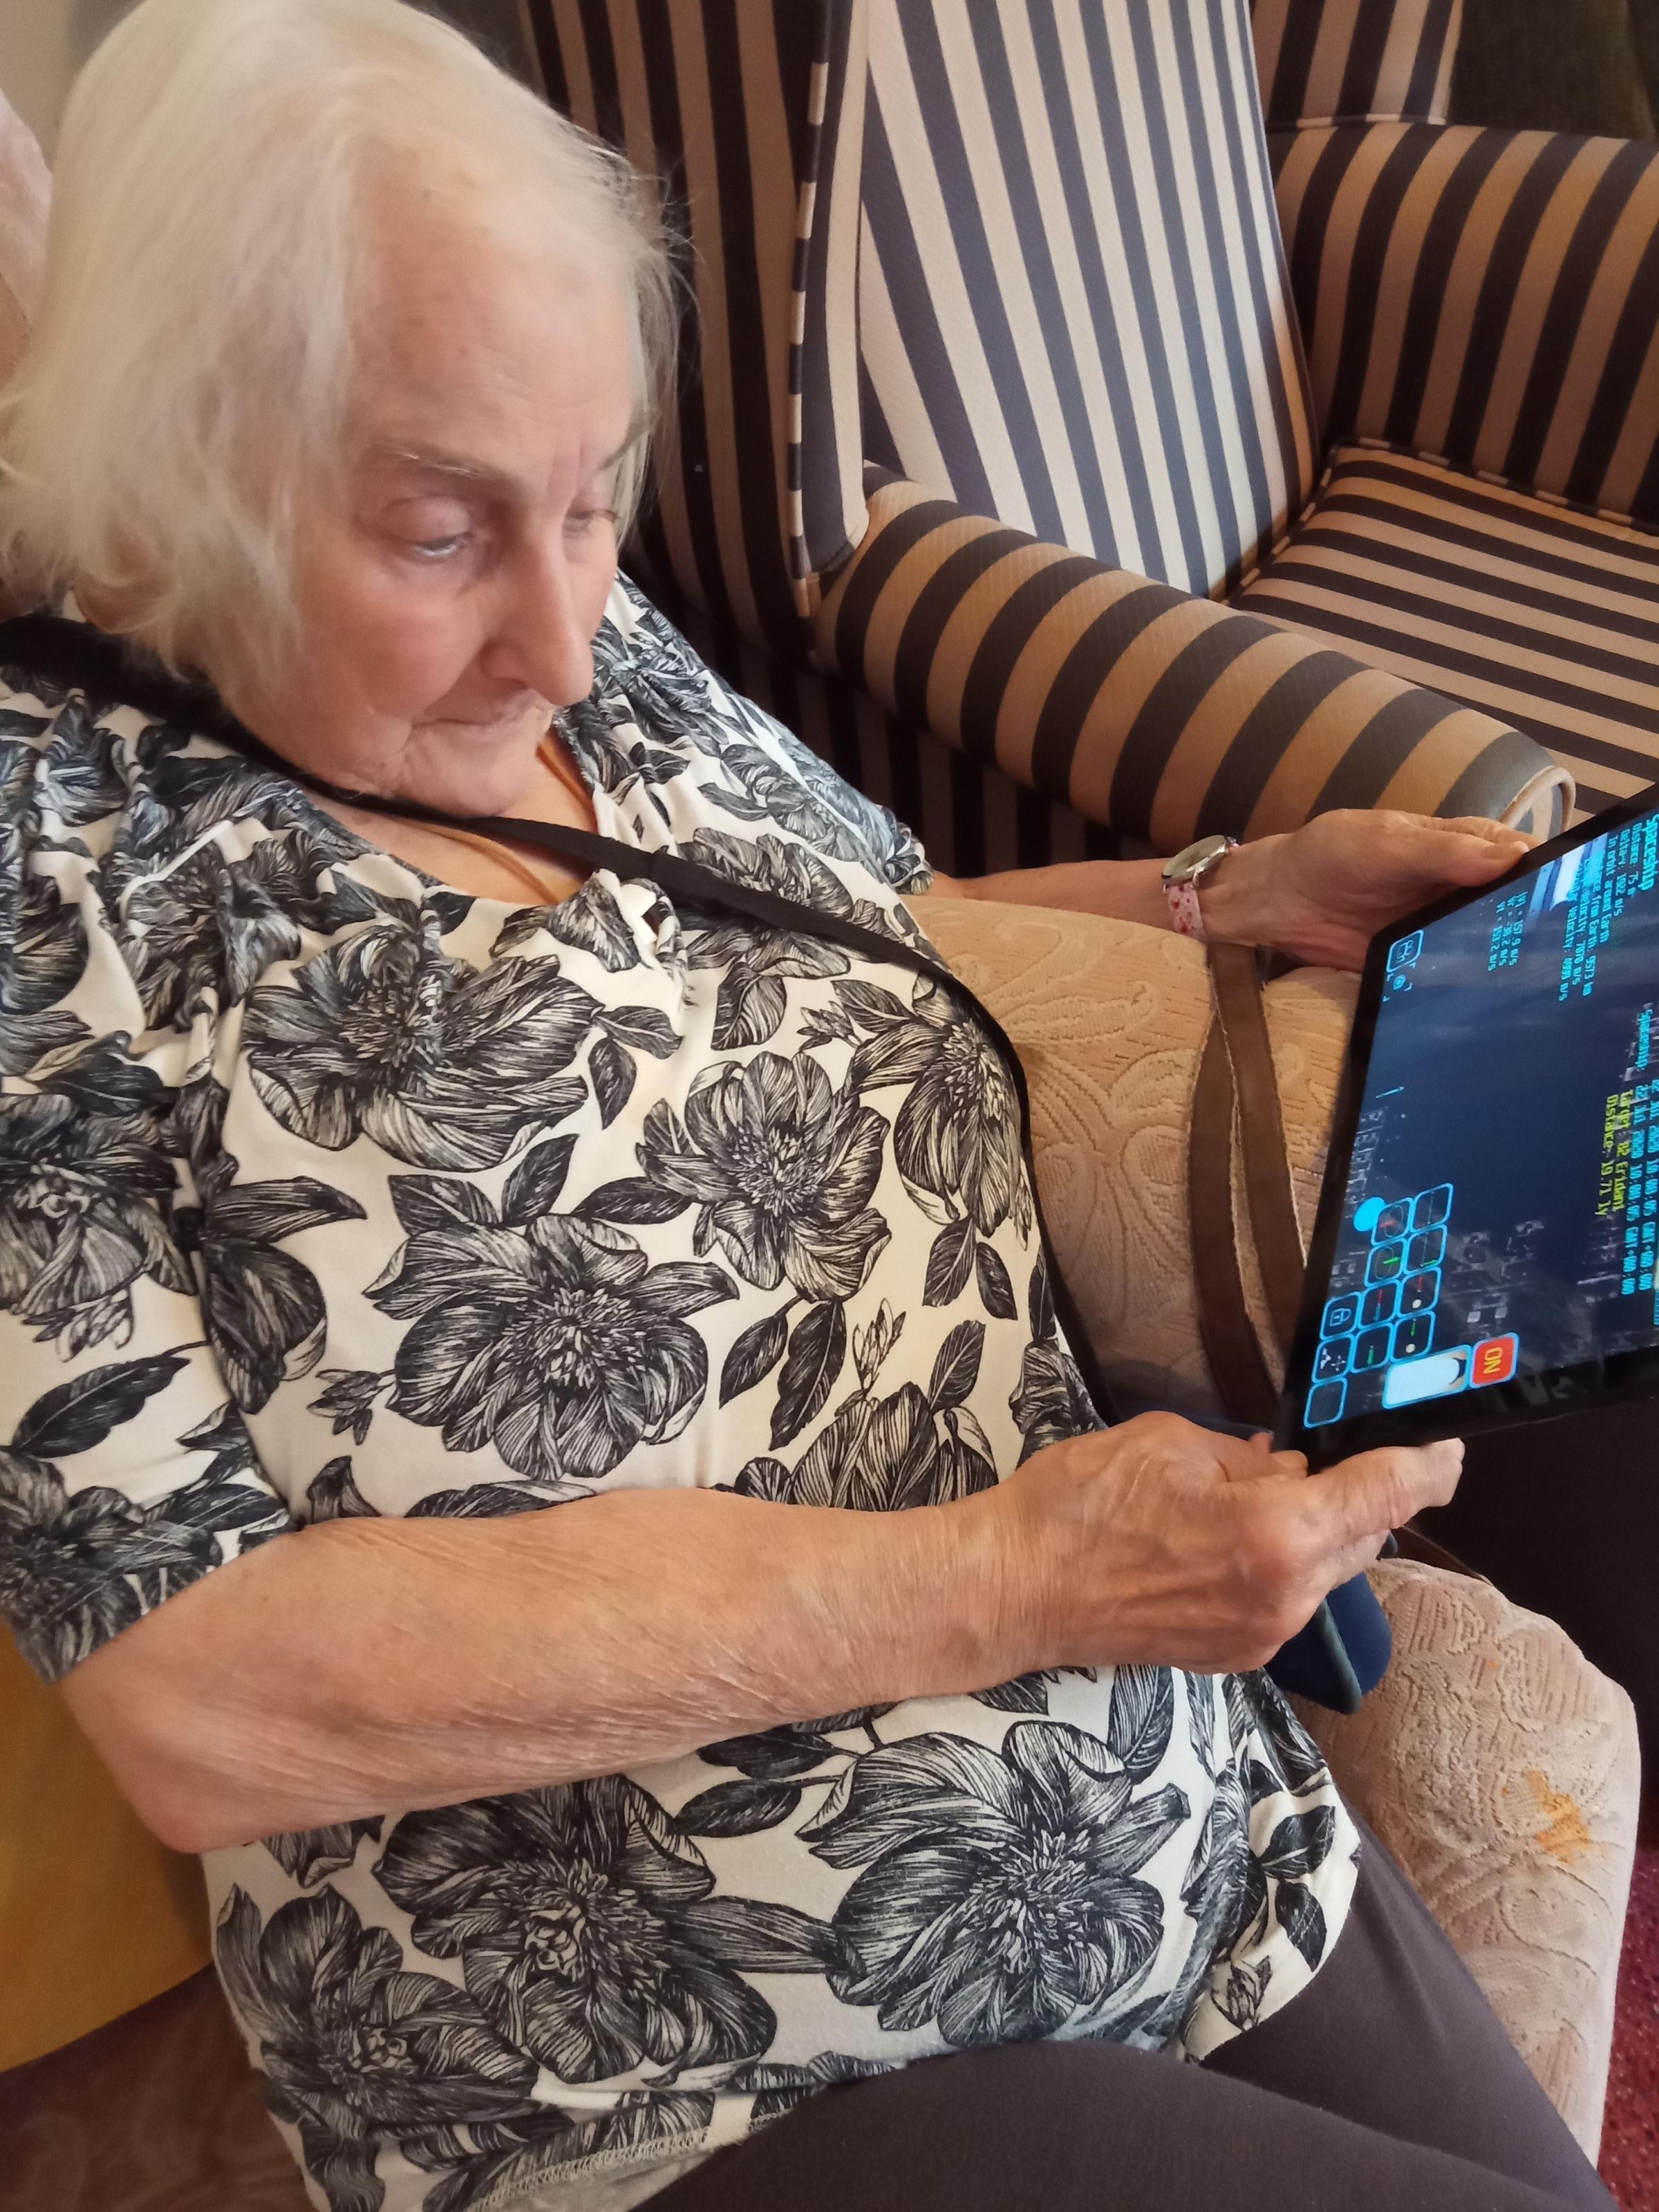 Care Home Residents Blast Off To Space On Simulator In Celebration Of Moon Landing Anniversary The Northern Echo - roblox blast off simulator